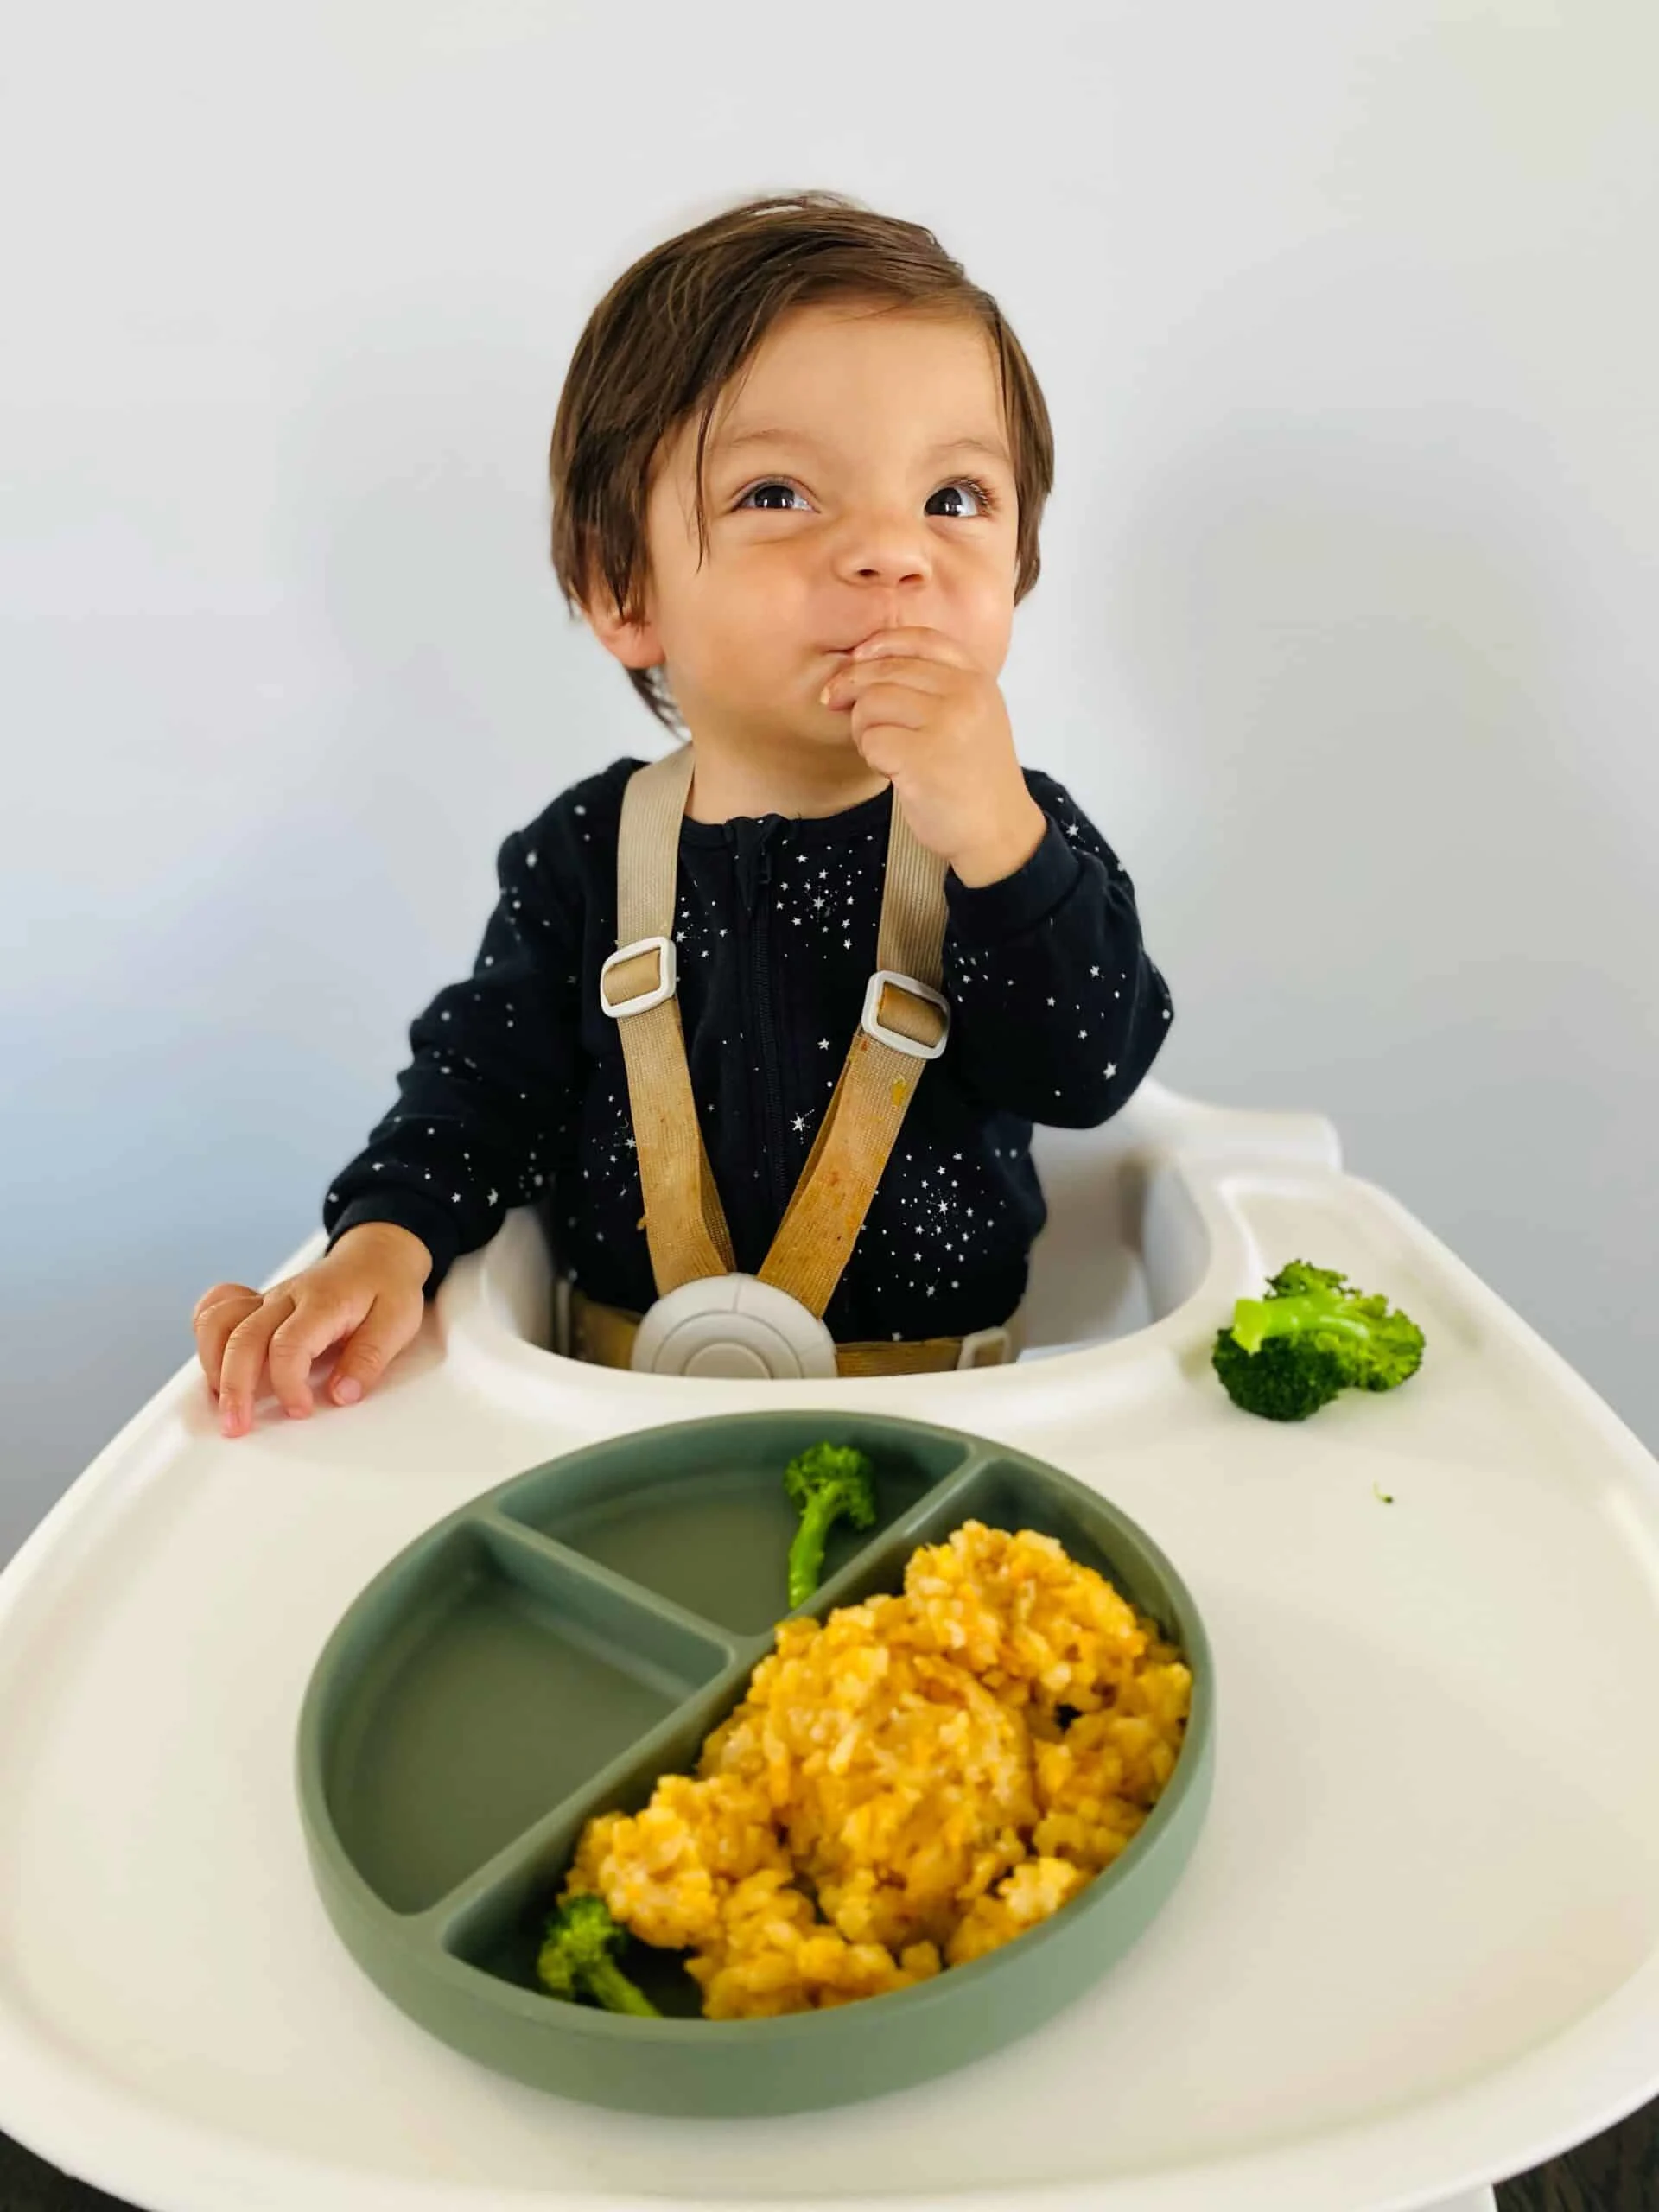 a baby in a highchair bringing a piece of food to his mouth with a plate of food in front of him